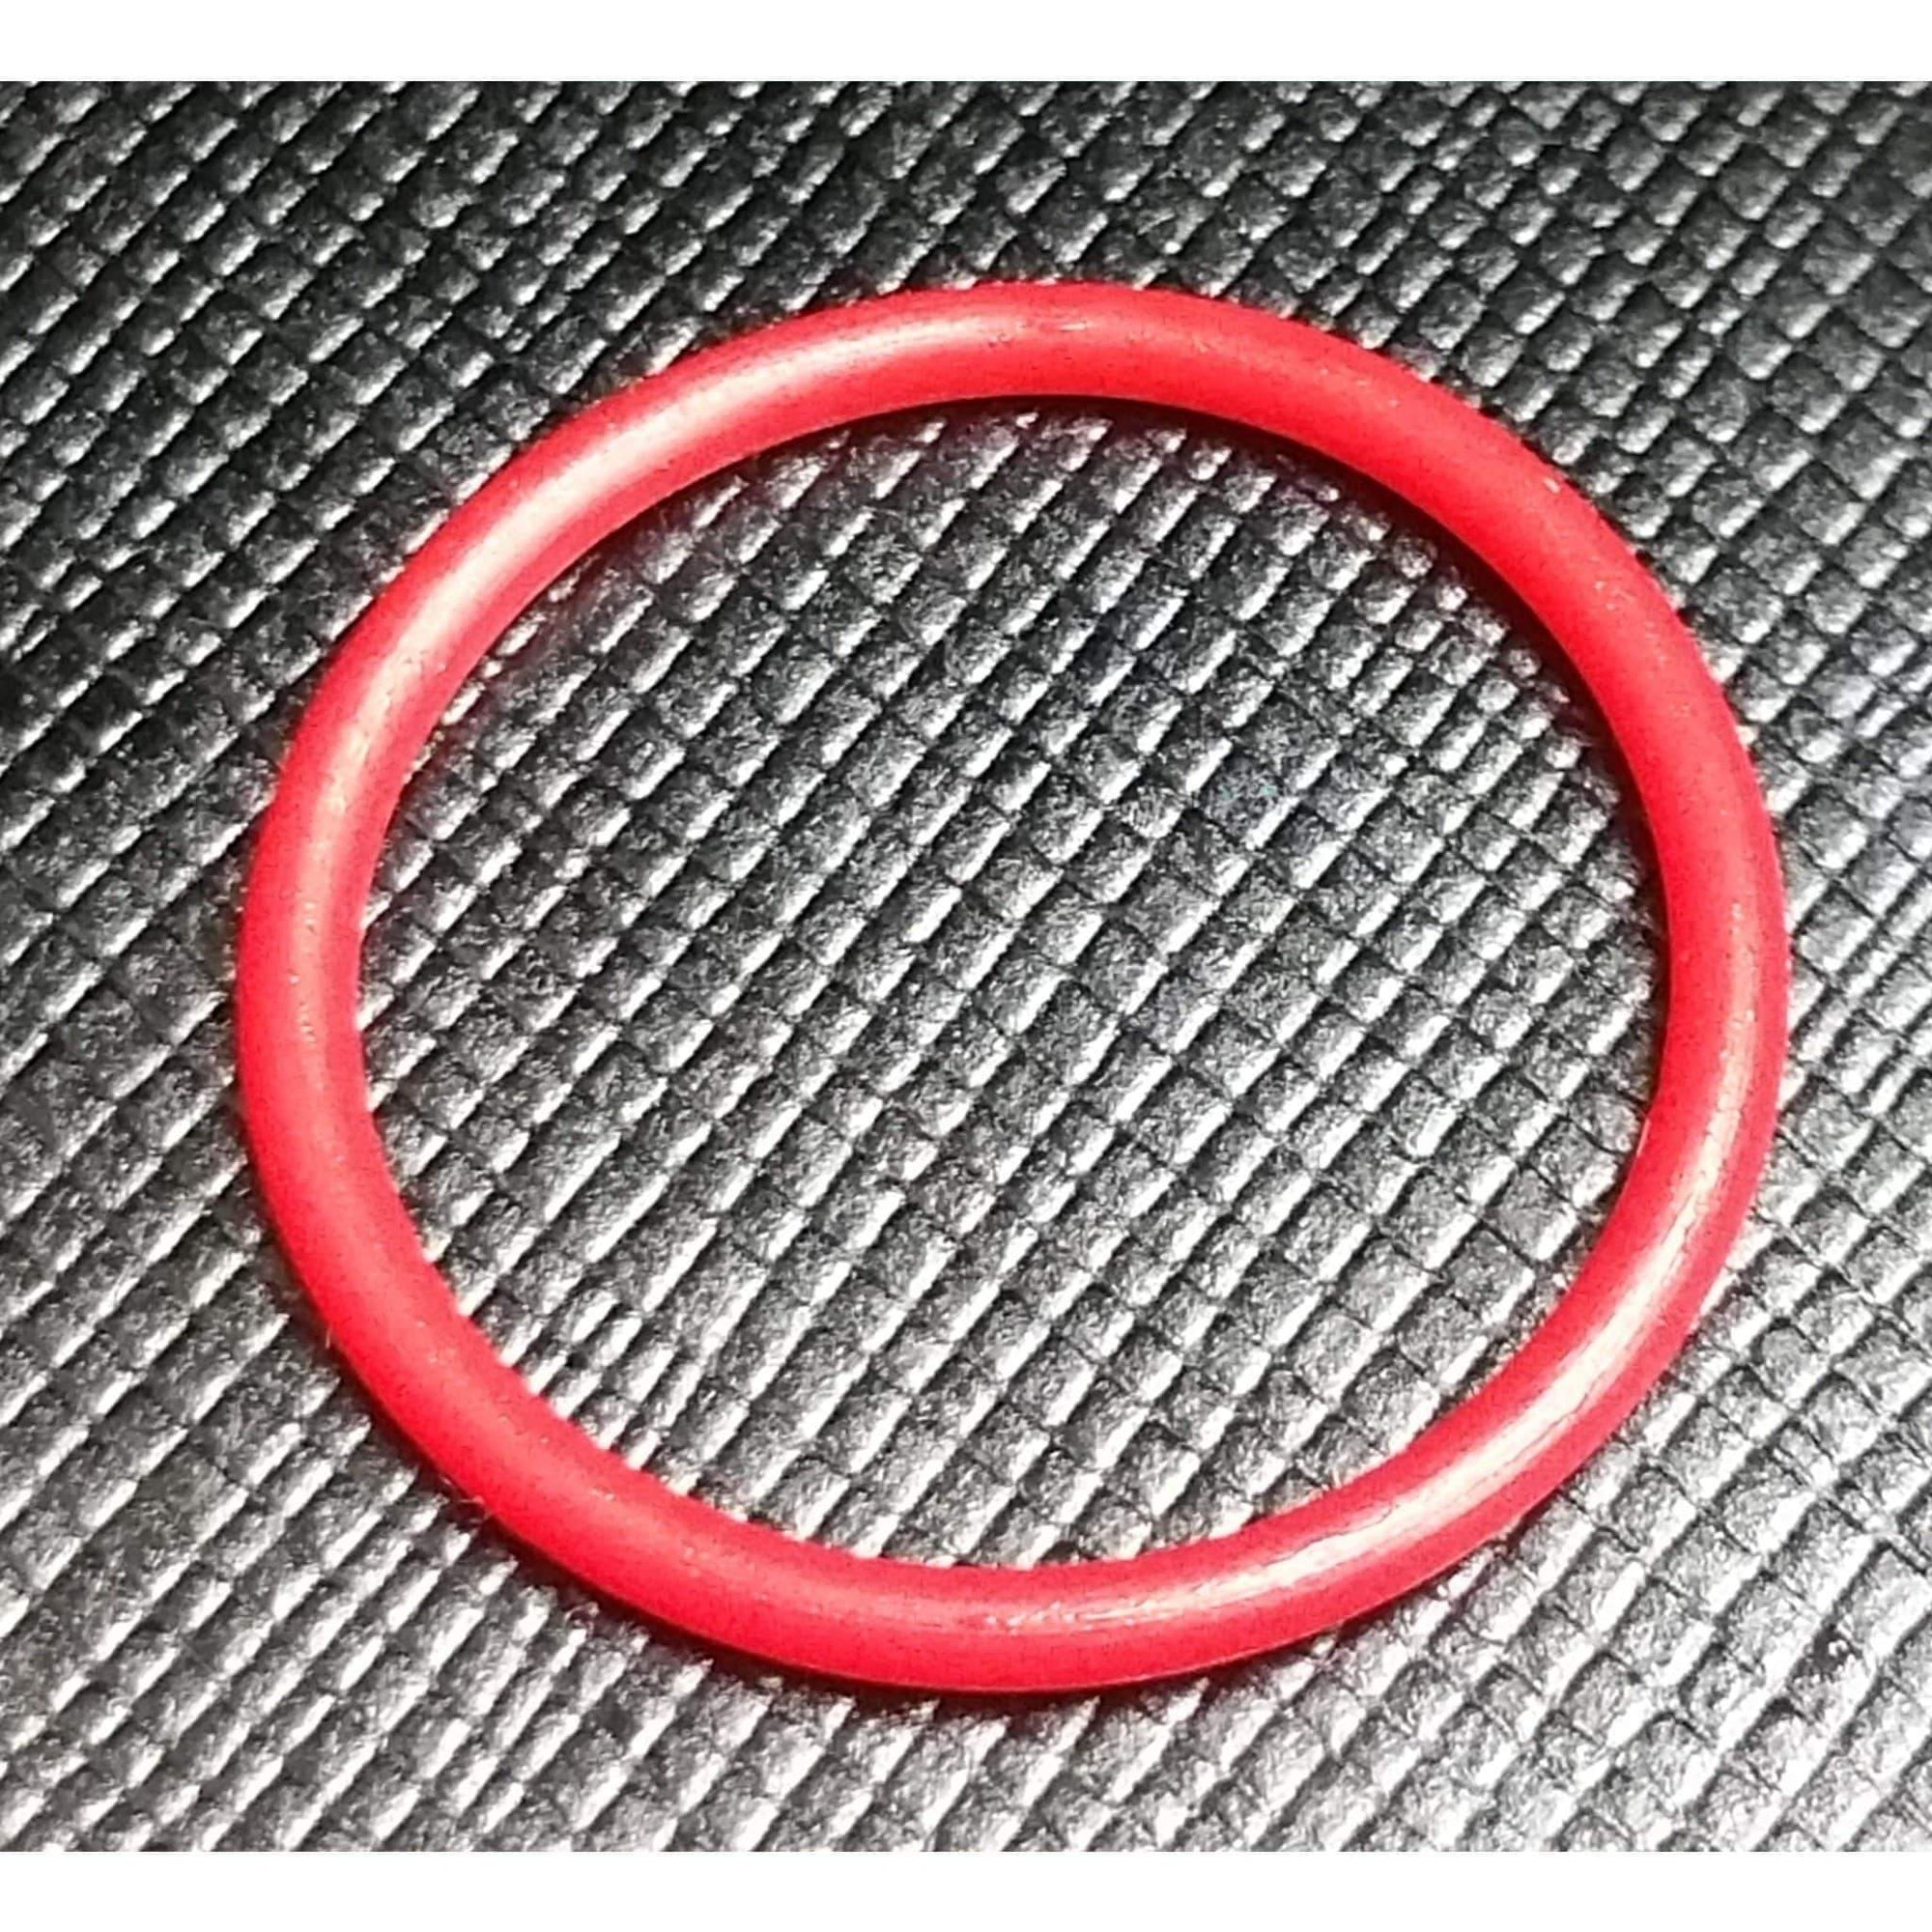 TFV4 Plus Replacement Seals Top Red Glass Oring Seals/Oring's